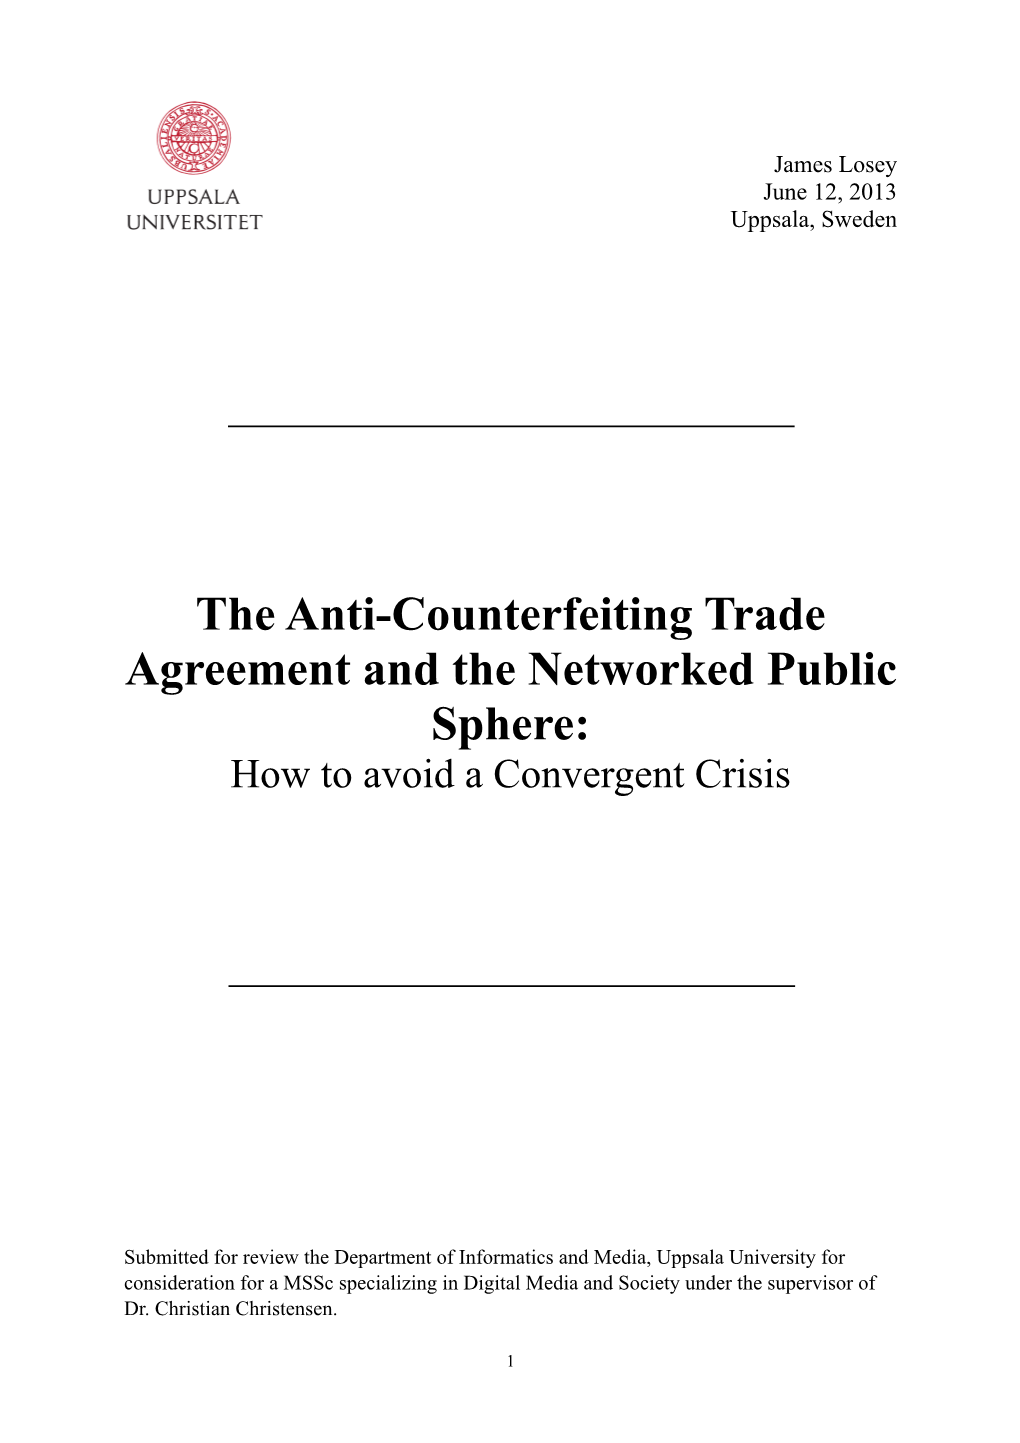 The Anti-Counterfeiting Trade Agreement and the Networked Public Sphere: How to Avoid a Convergent Crisis